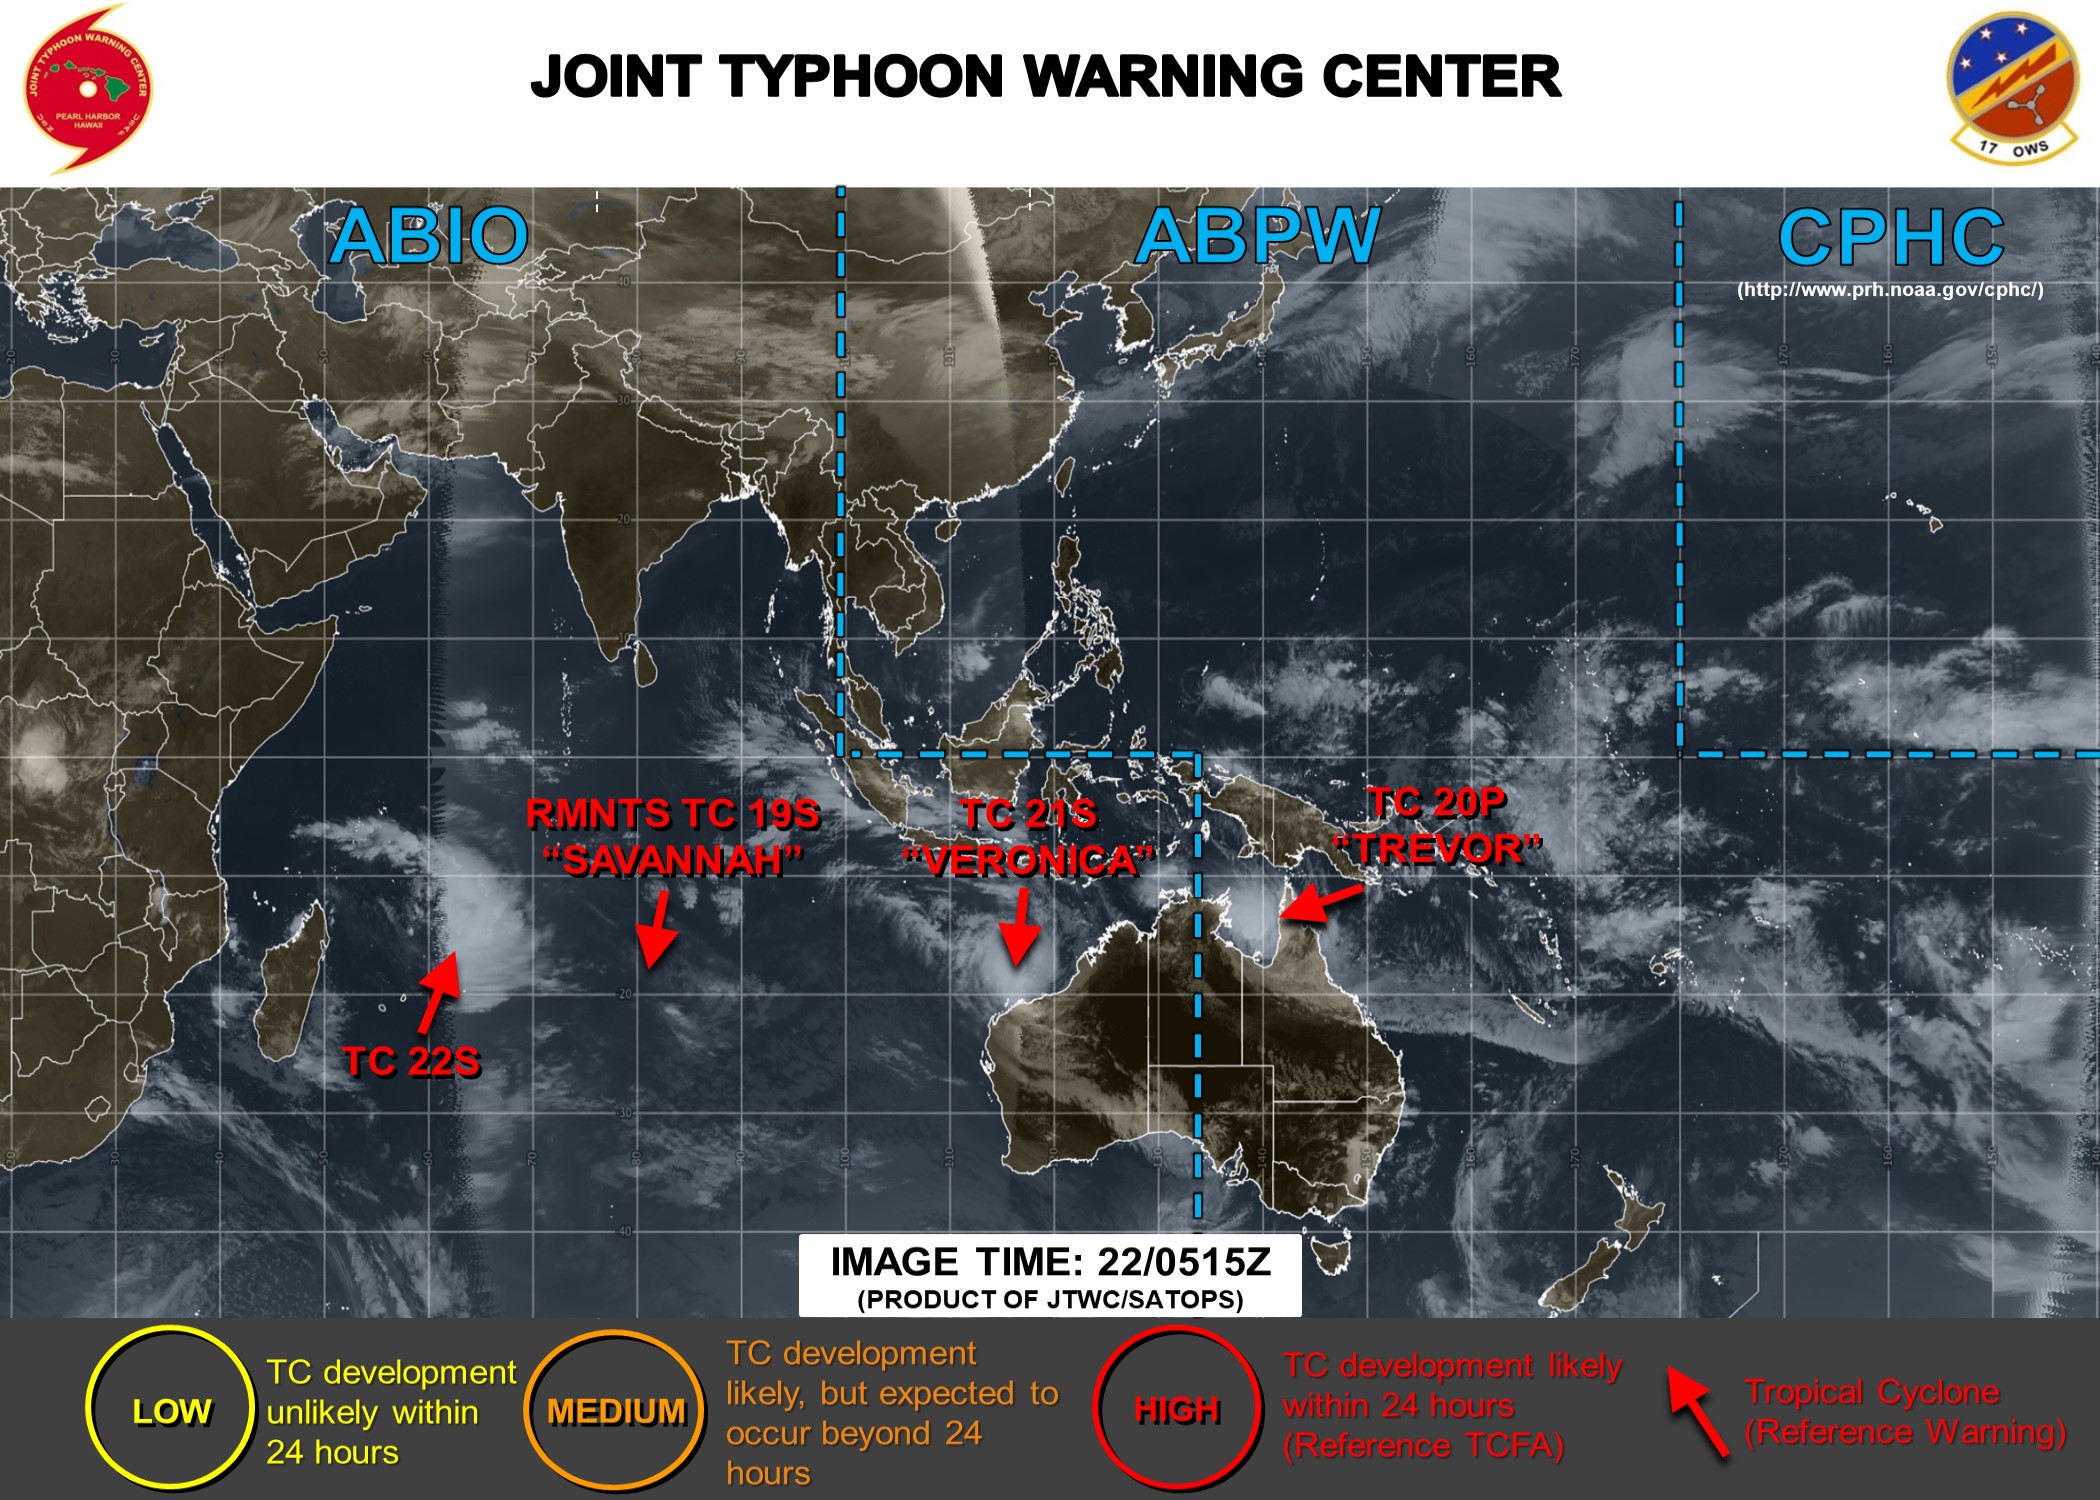 JTWC: busy or not busy? That's the question!